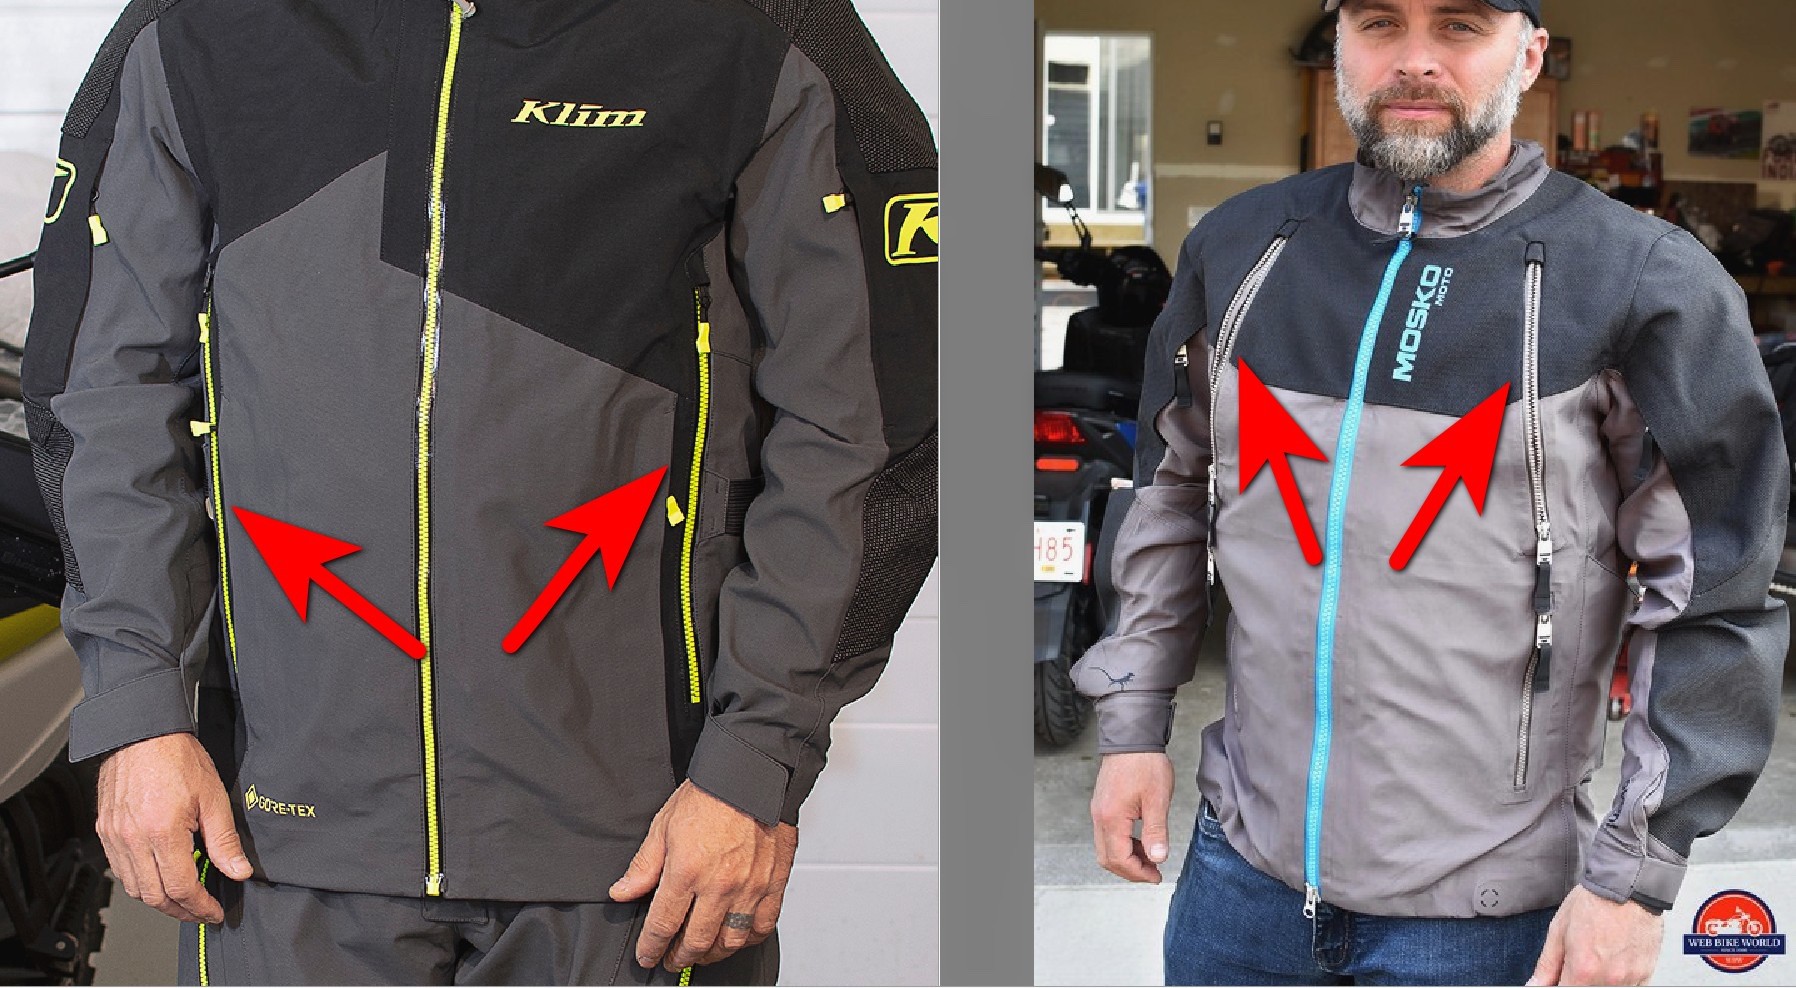 The front vents are located differently on the Raptor GTX vs on the Basilisk jacket.